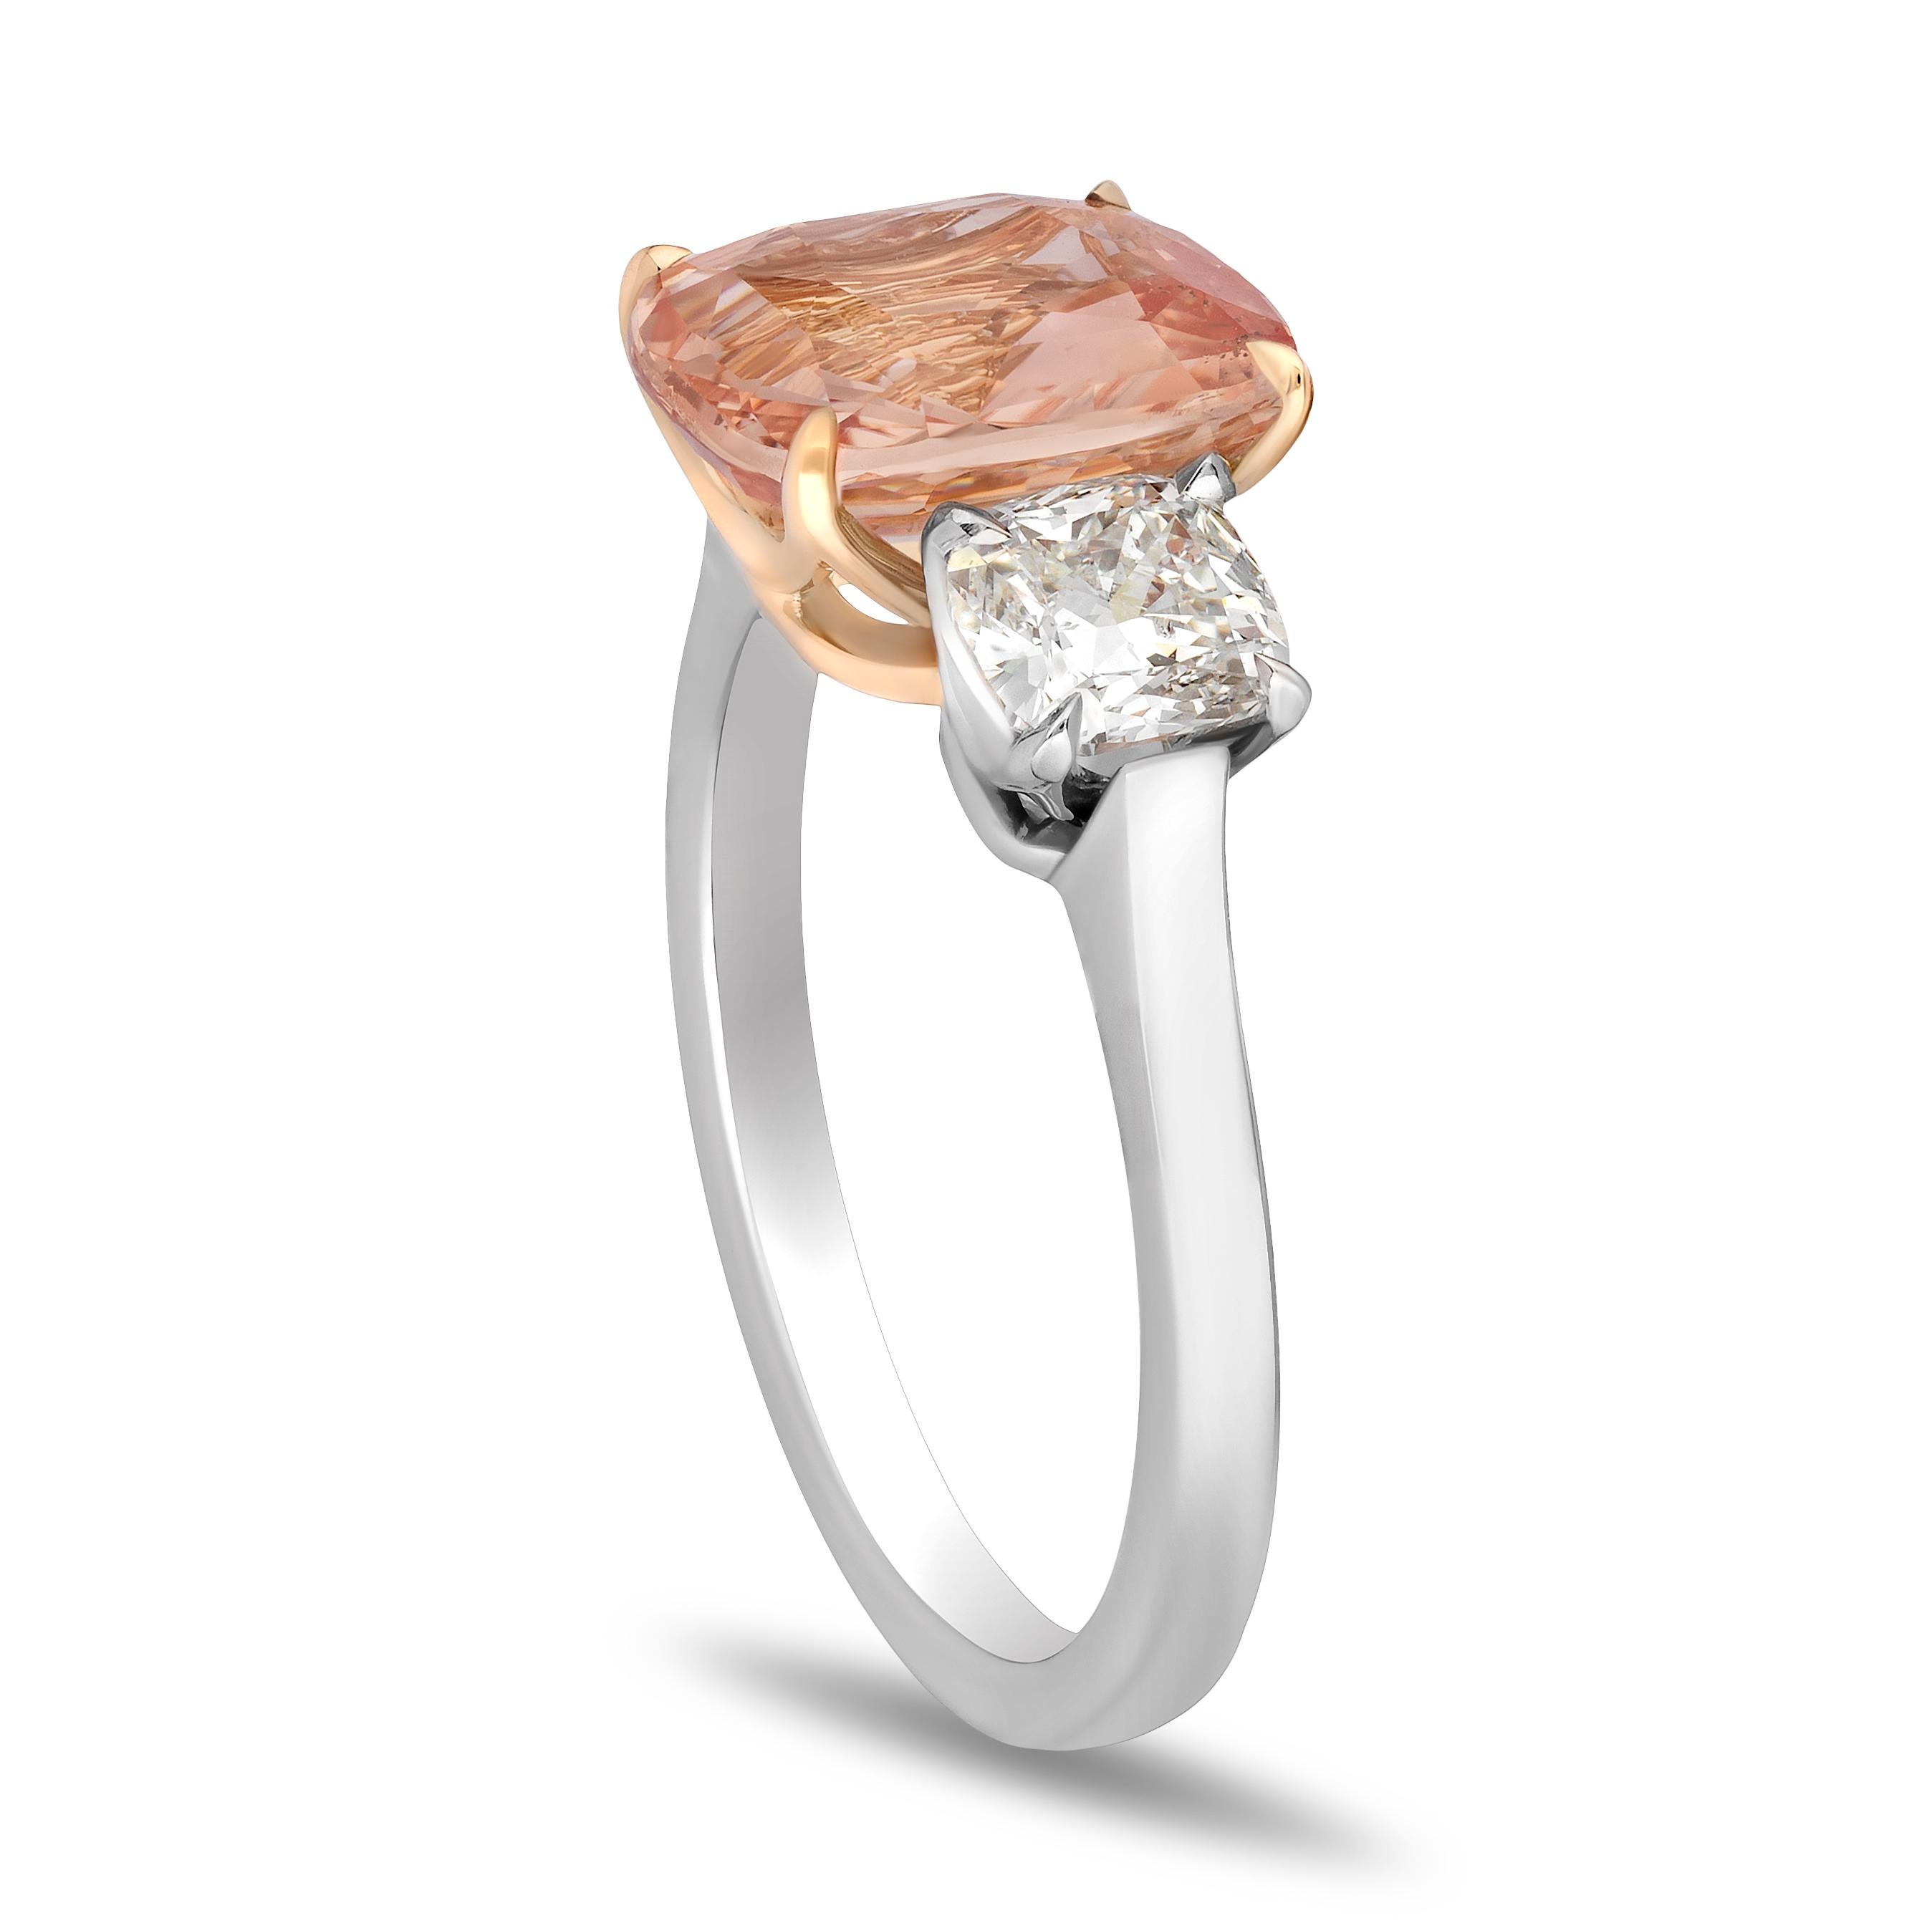 3.52 carat Cushion Padparadscha with two Cushion Brilliant Diamonds 1.18 carats set in a handmade Platinum & 18k ring